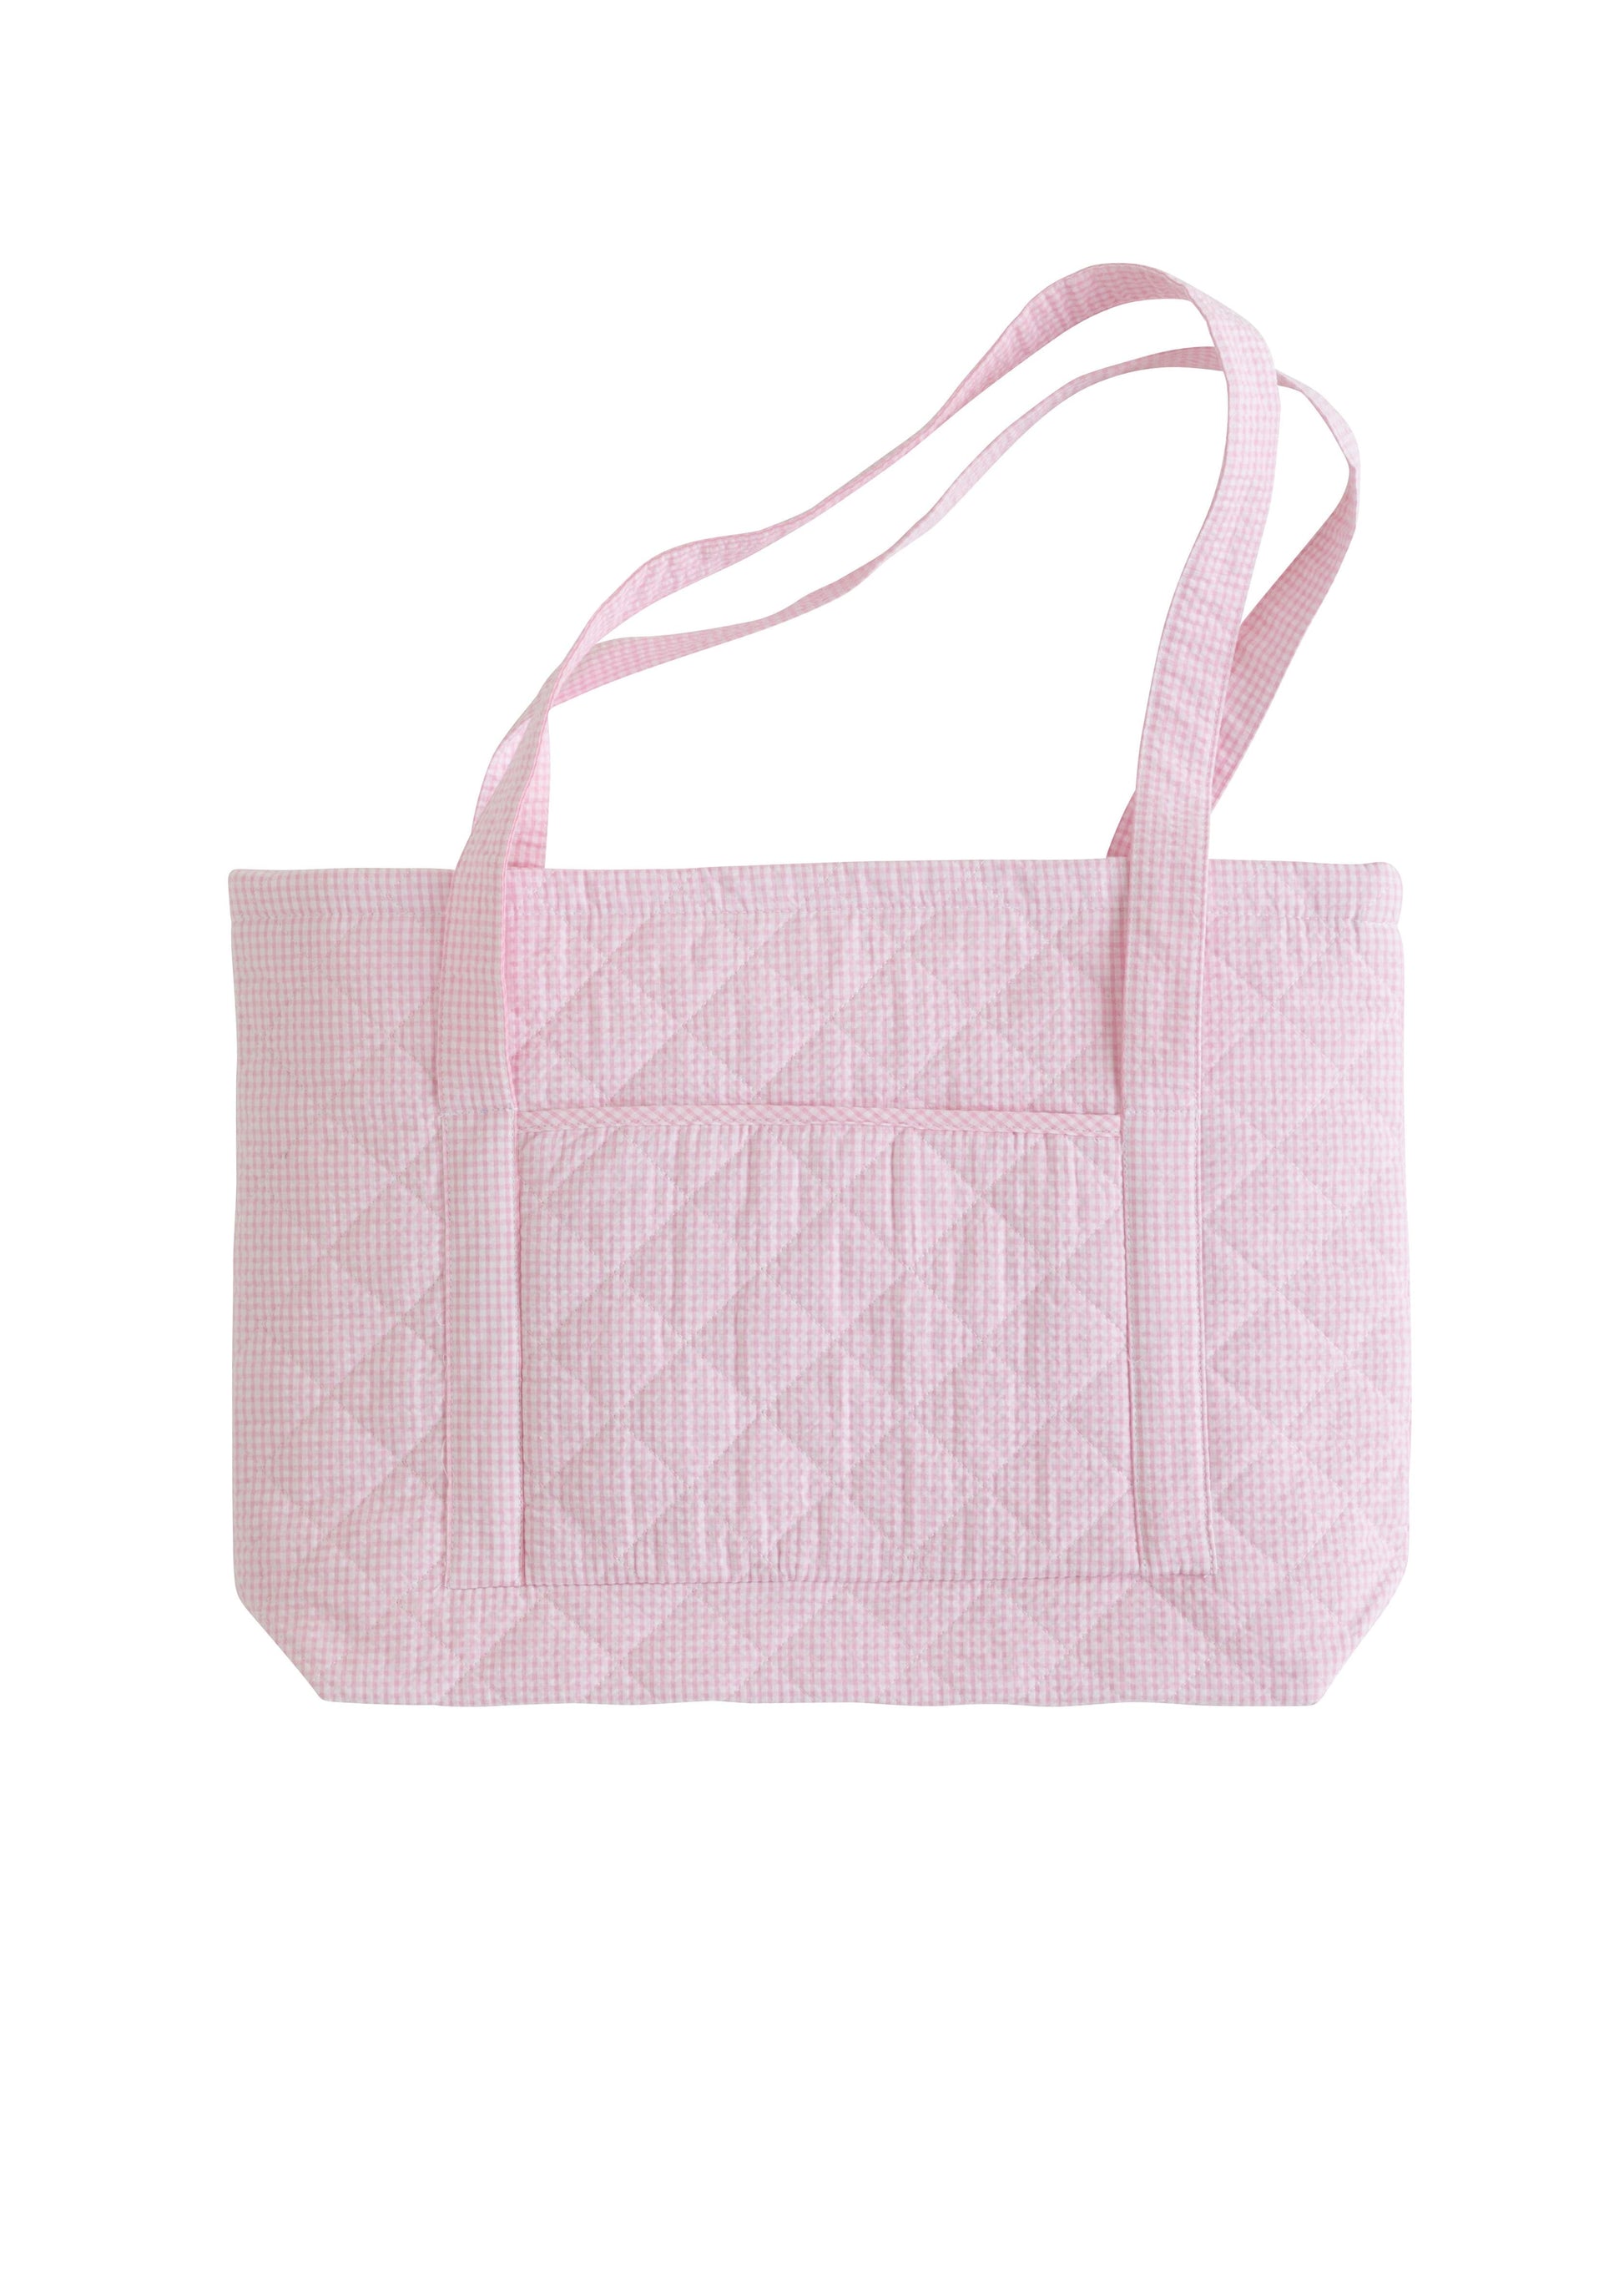 Little English Quilted Luggage - Light Pink Tote Bag